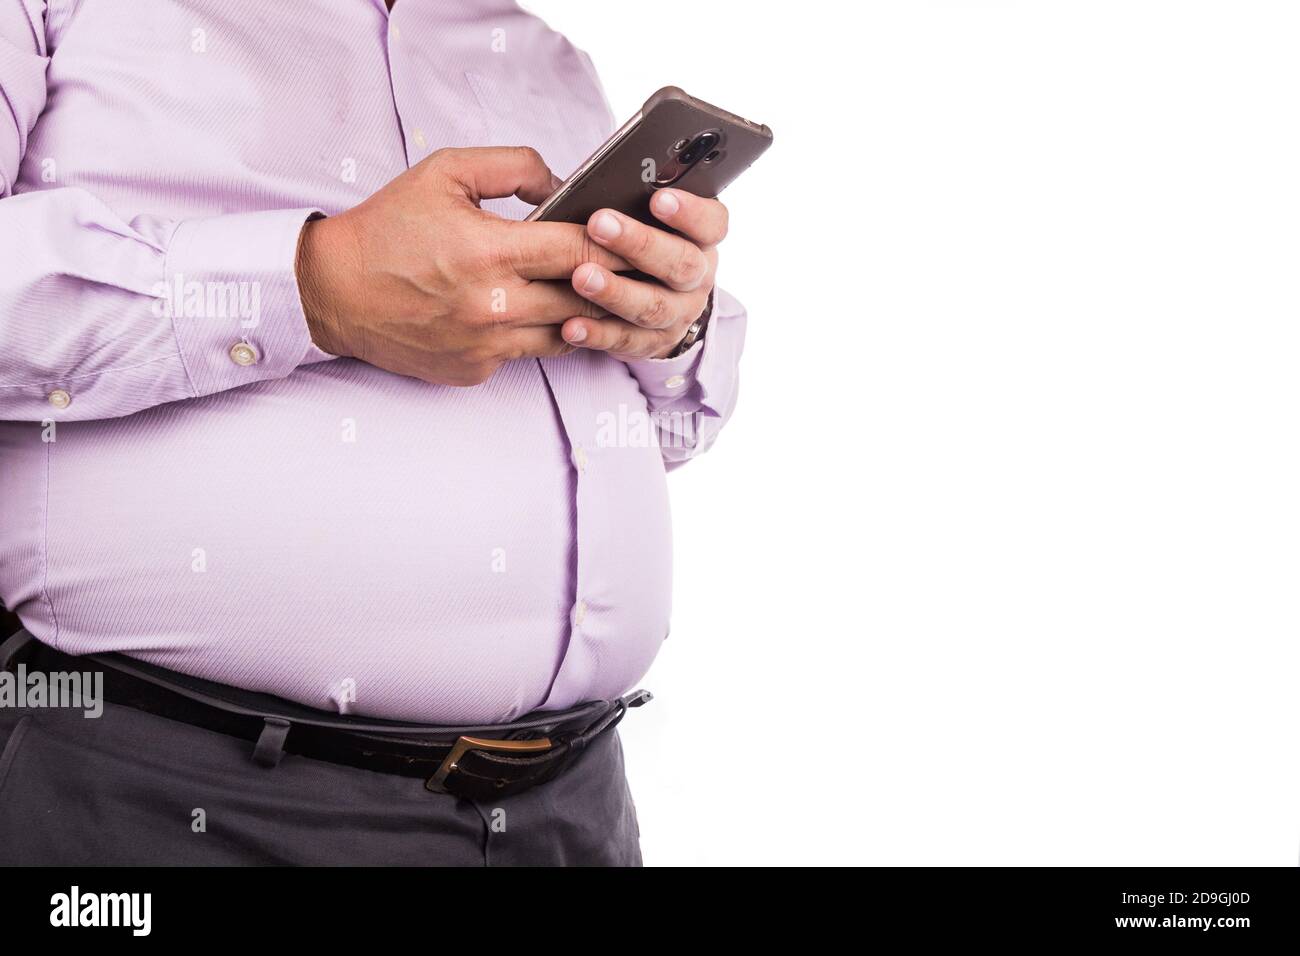 Big belly man with visceral subcutaneous fats in tight shirt Stock Photo